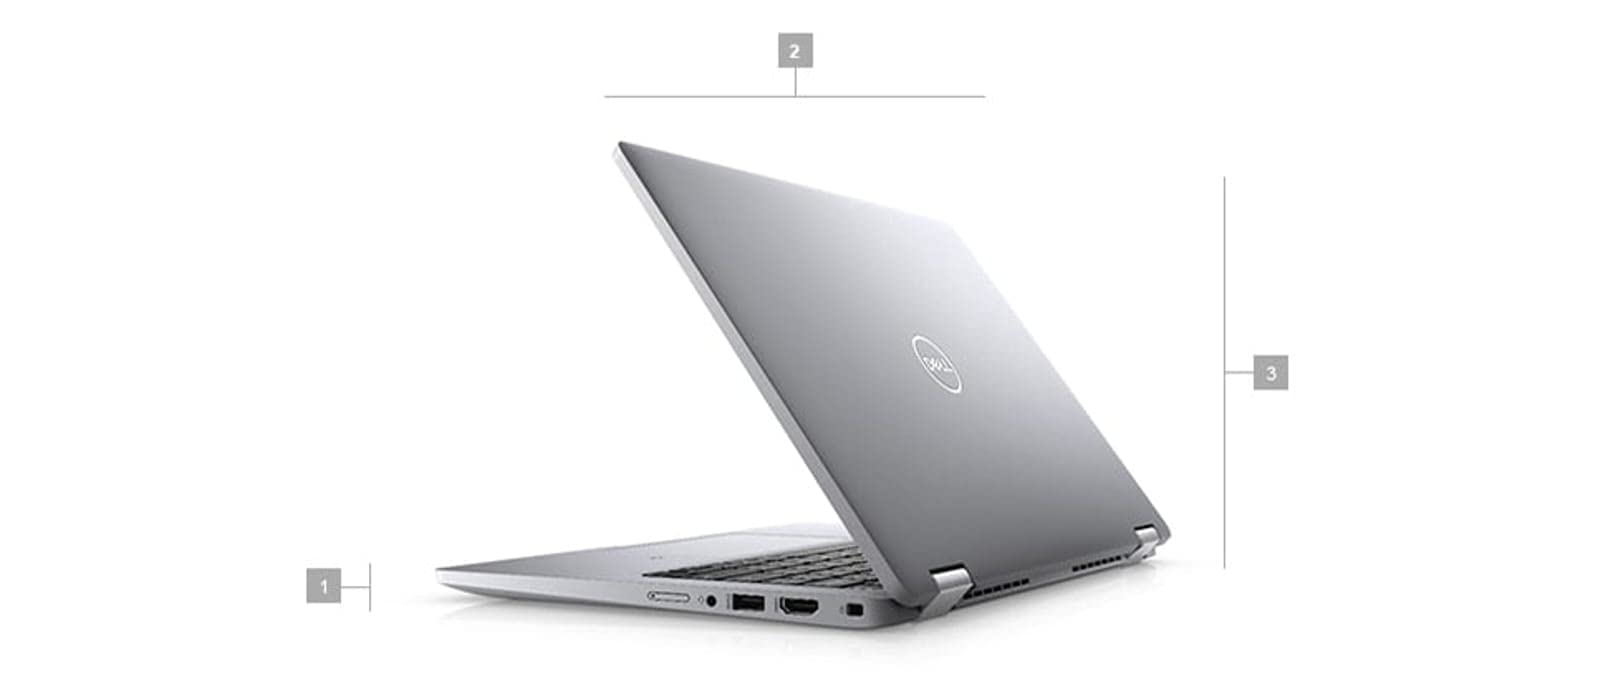 Dell Latitude 5000 5320 2-in-1 (2021) | 13.3" FHD Touch | Core i5 - 512GB SSD - 8GB RAM | 4 Cores @ 4.2 GHz - 11th Gen CPU Win 11 Pro (Renewed)